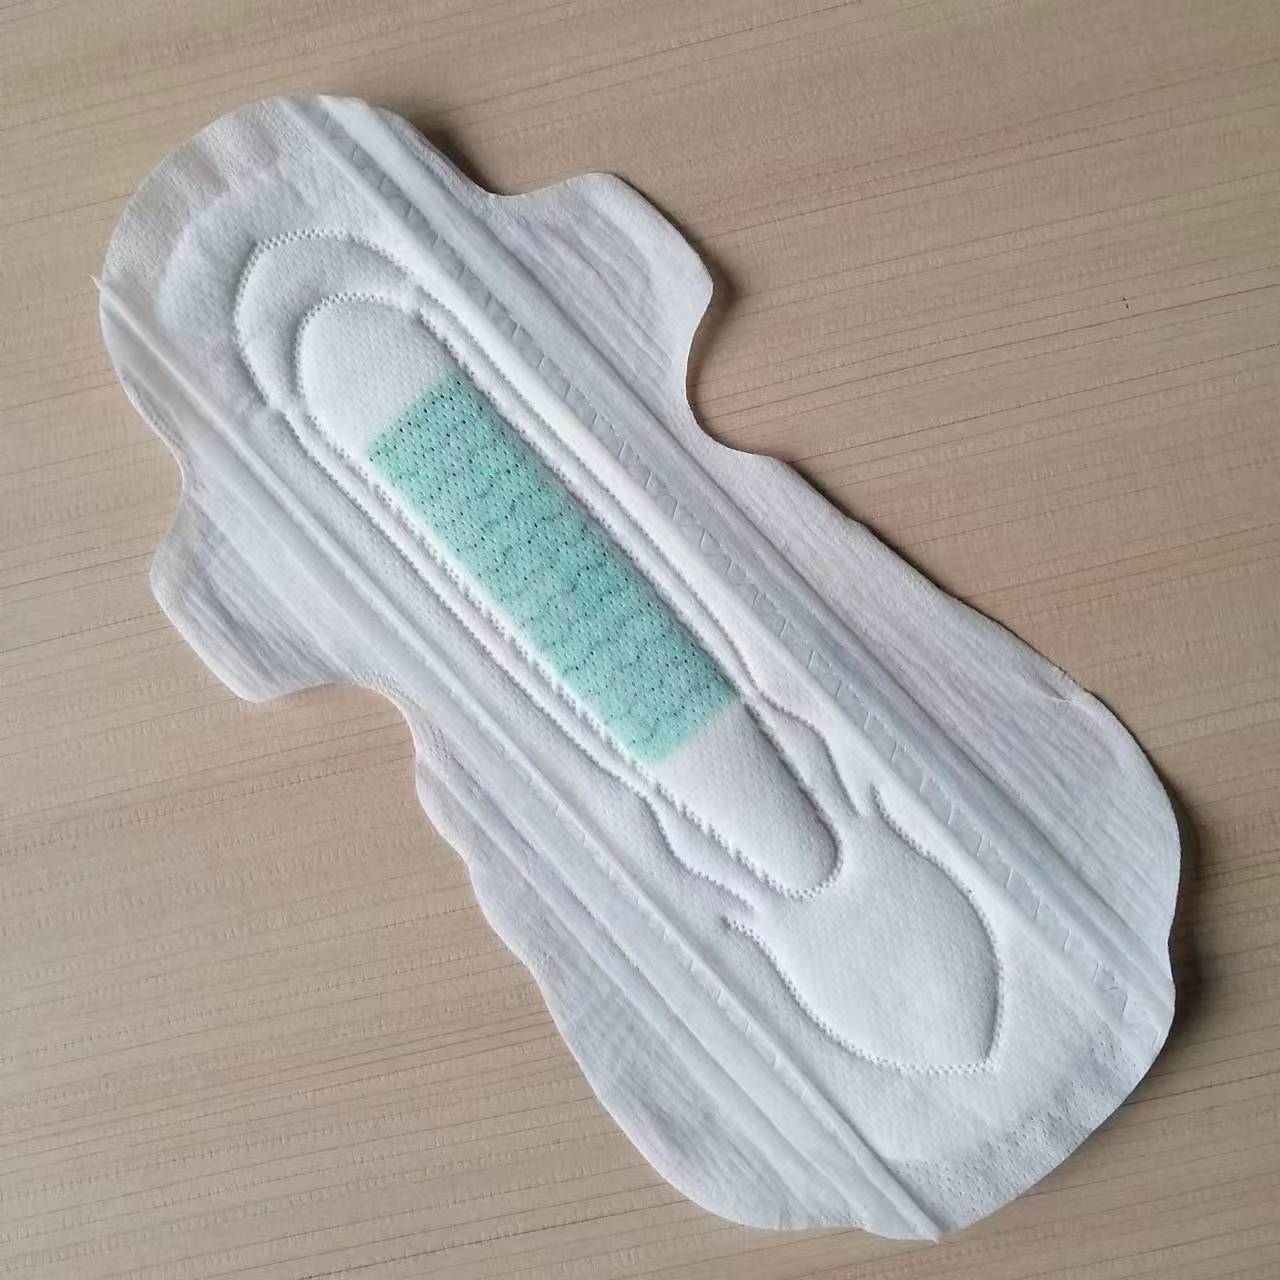 Difference between Panty Liners and Sanitary Napkins